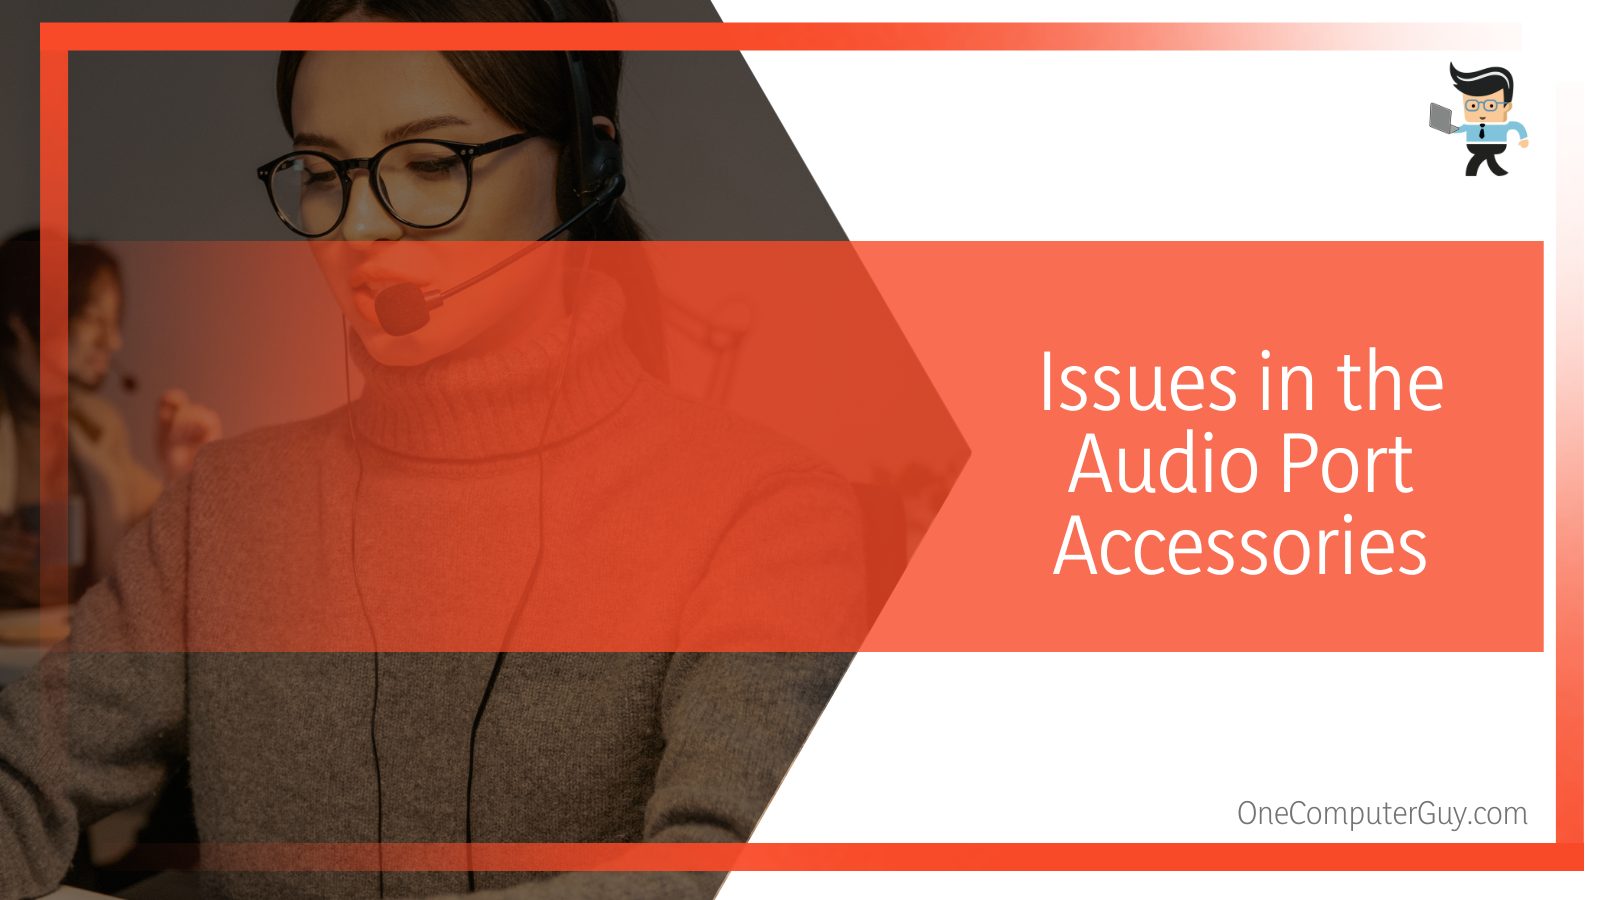 Issues in the Audio Port Accessories